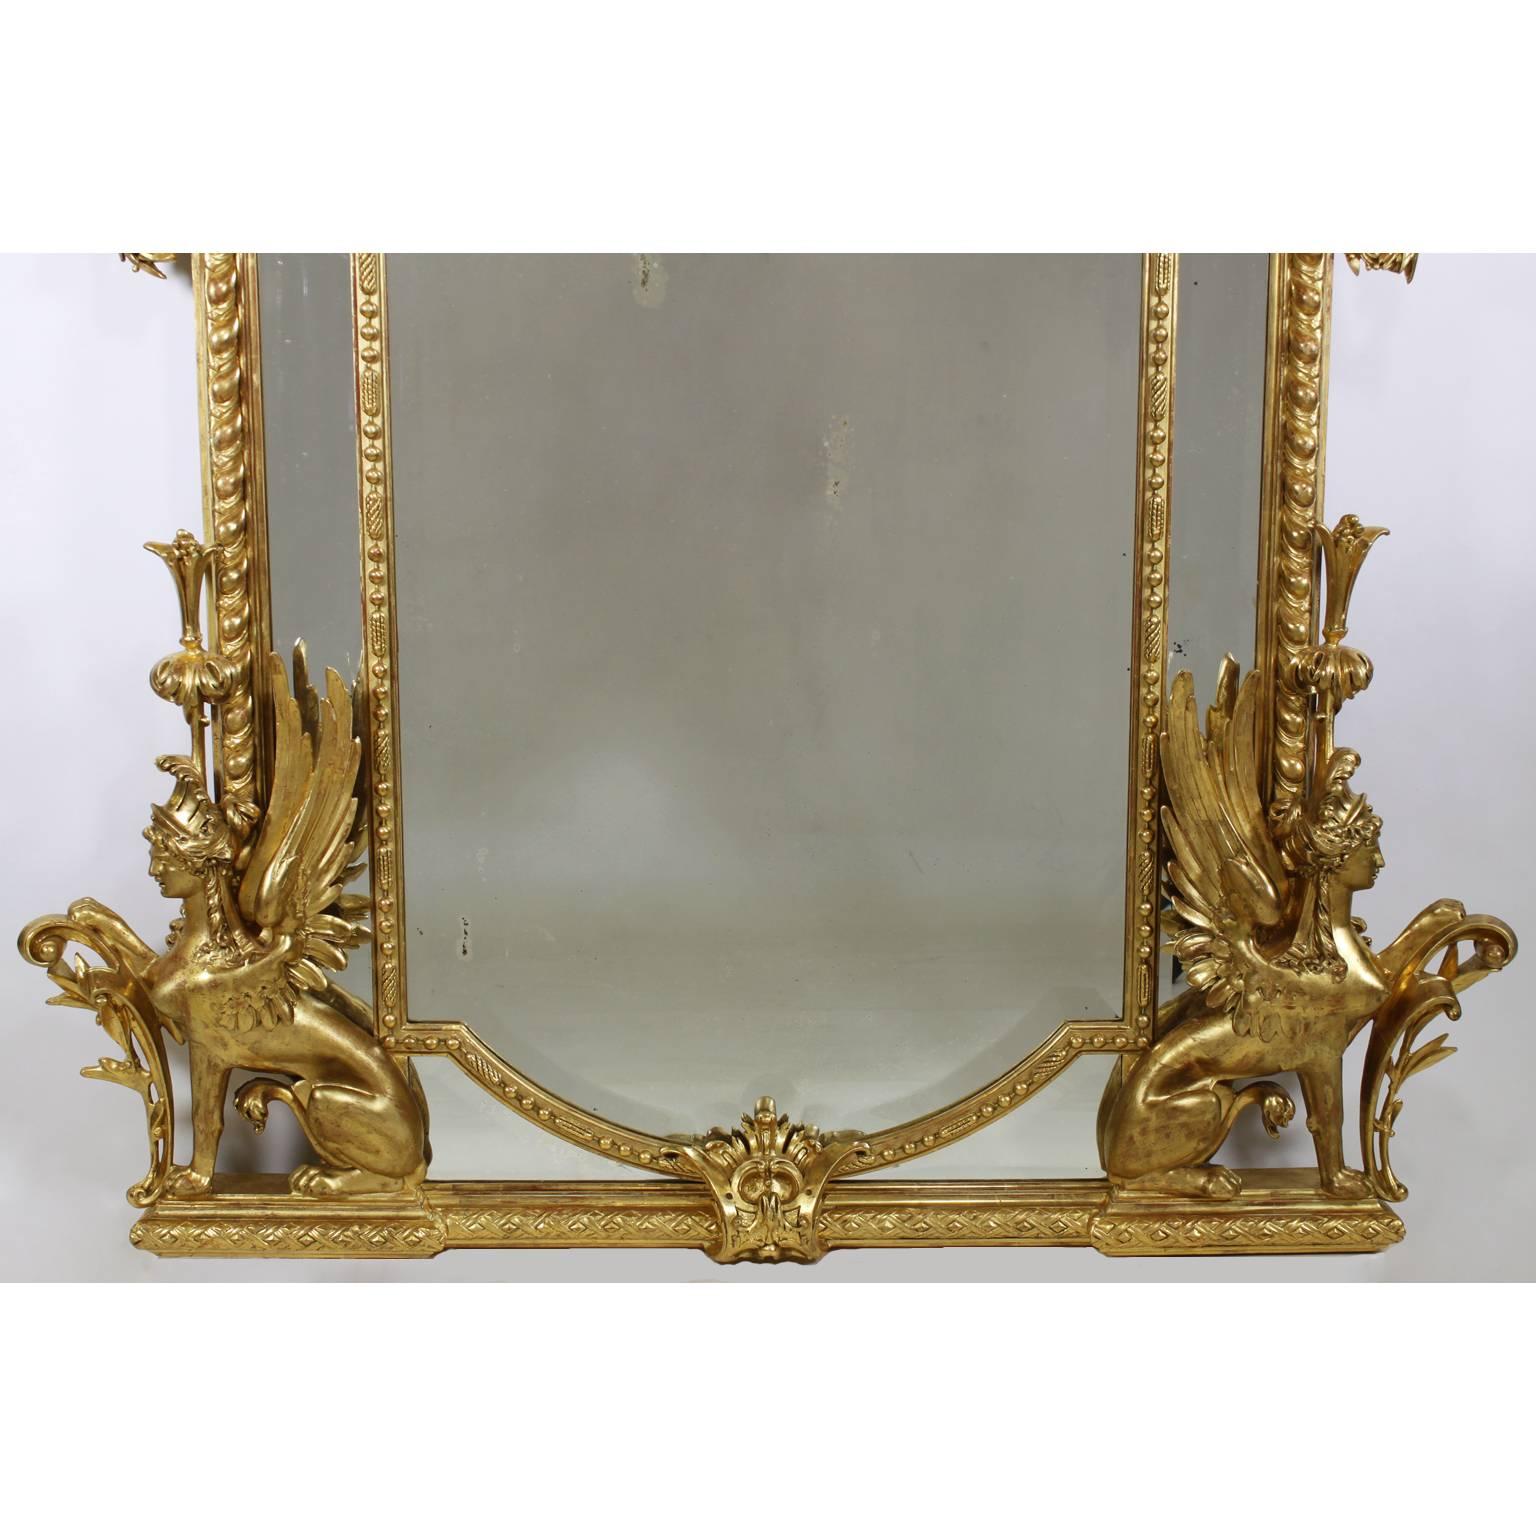 Empire Revival French Empire Style 19th Century Napoleon III Giltwood Mirror with Sphinxes For Sale